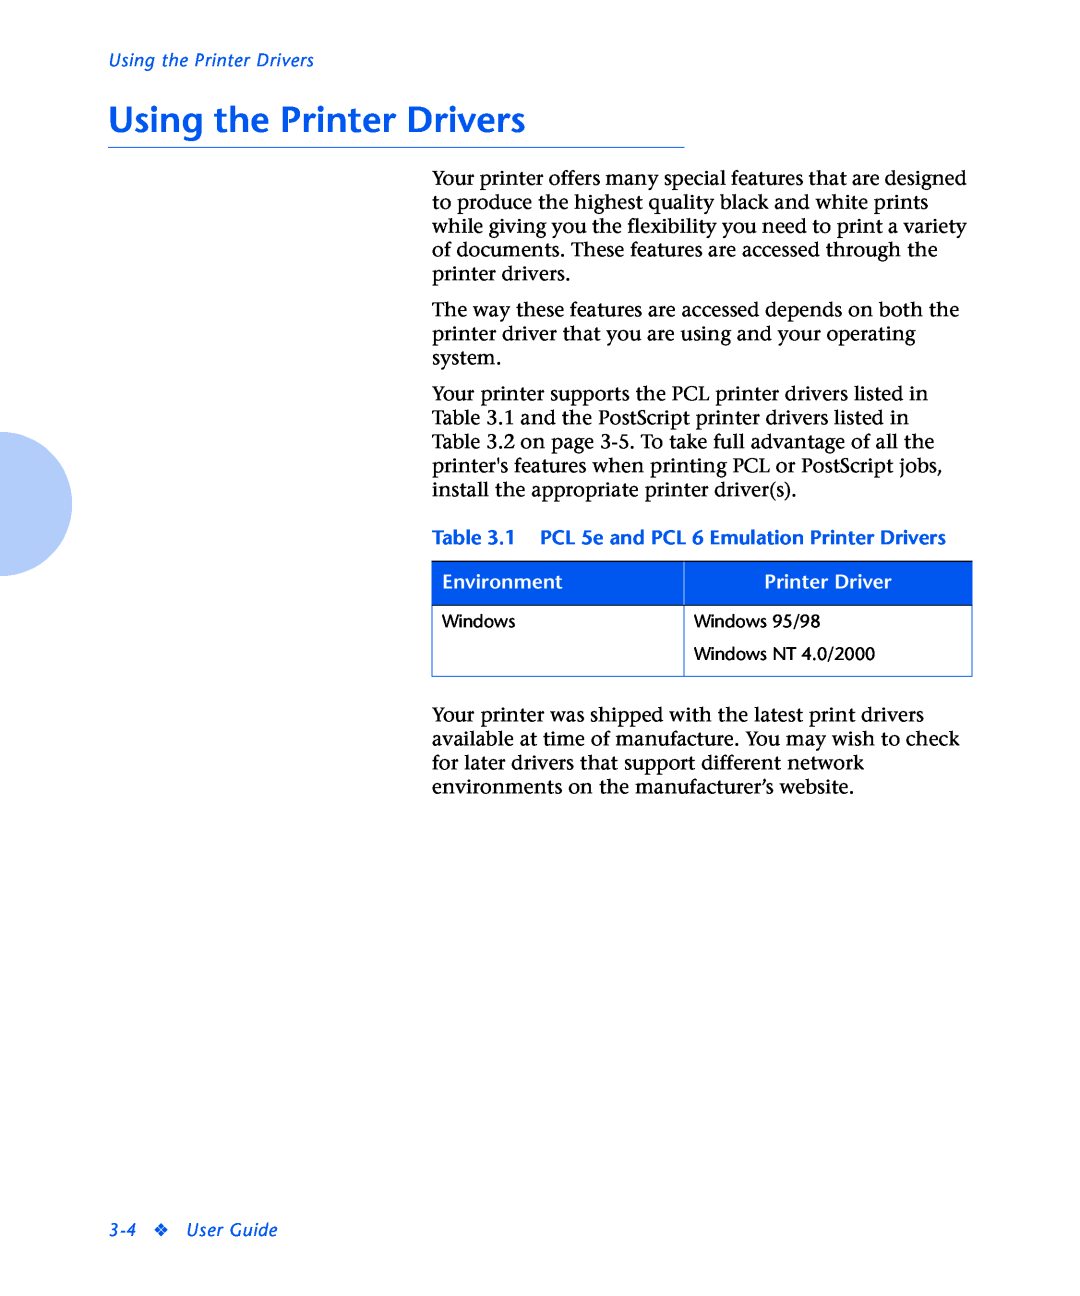 Xerox N2125 manual Using the Printer Drivers, 1 PCL 5e and PCL 6 Emulation Printer Drivers, Environment 